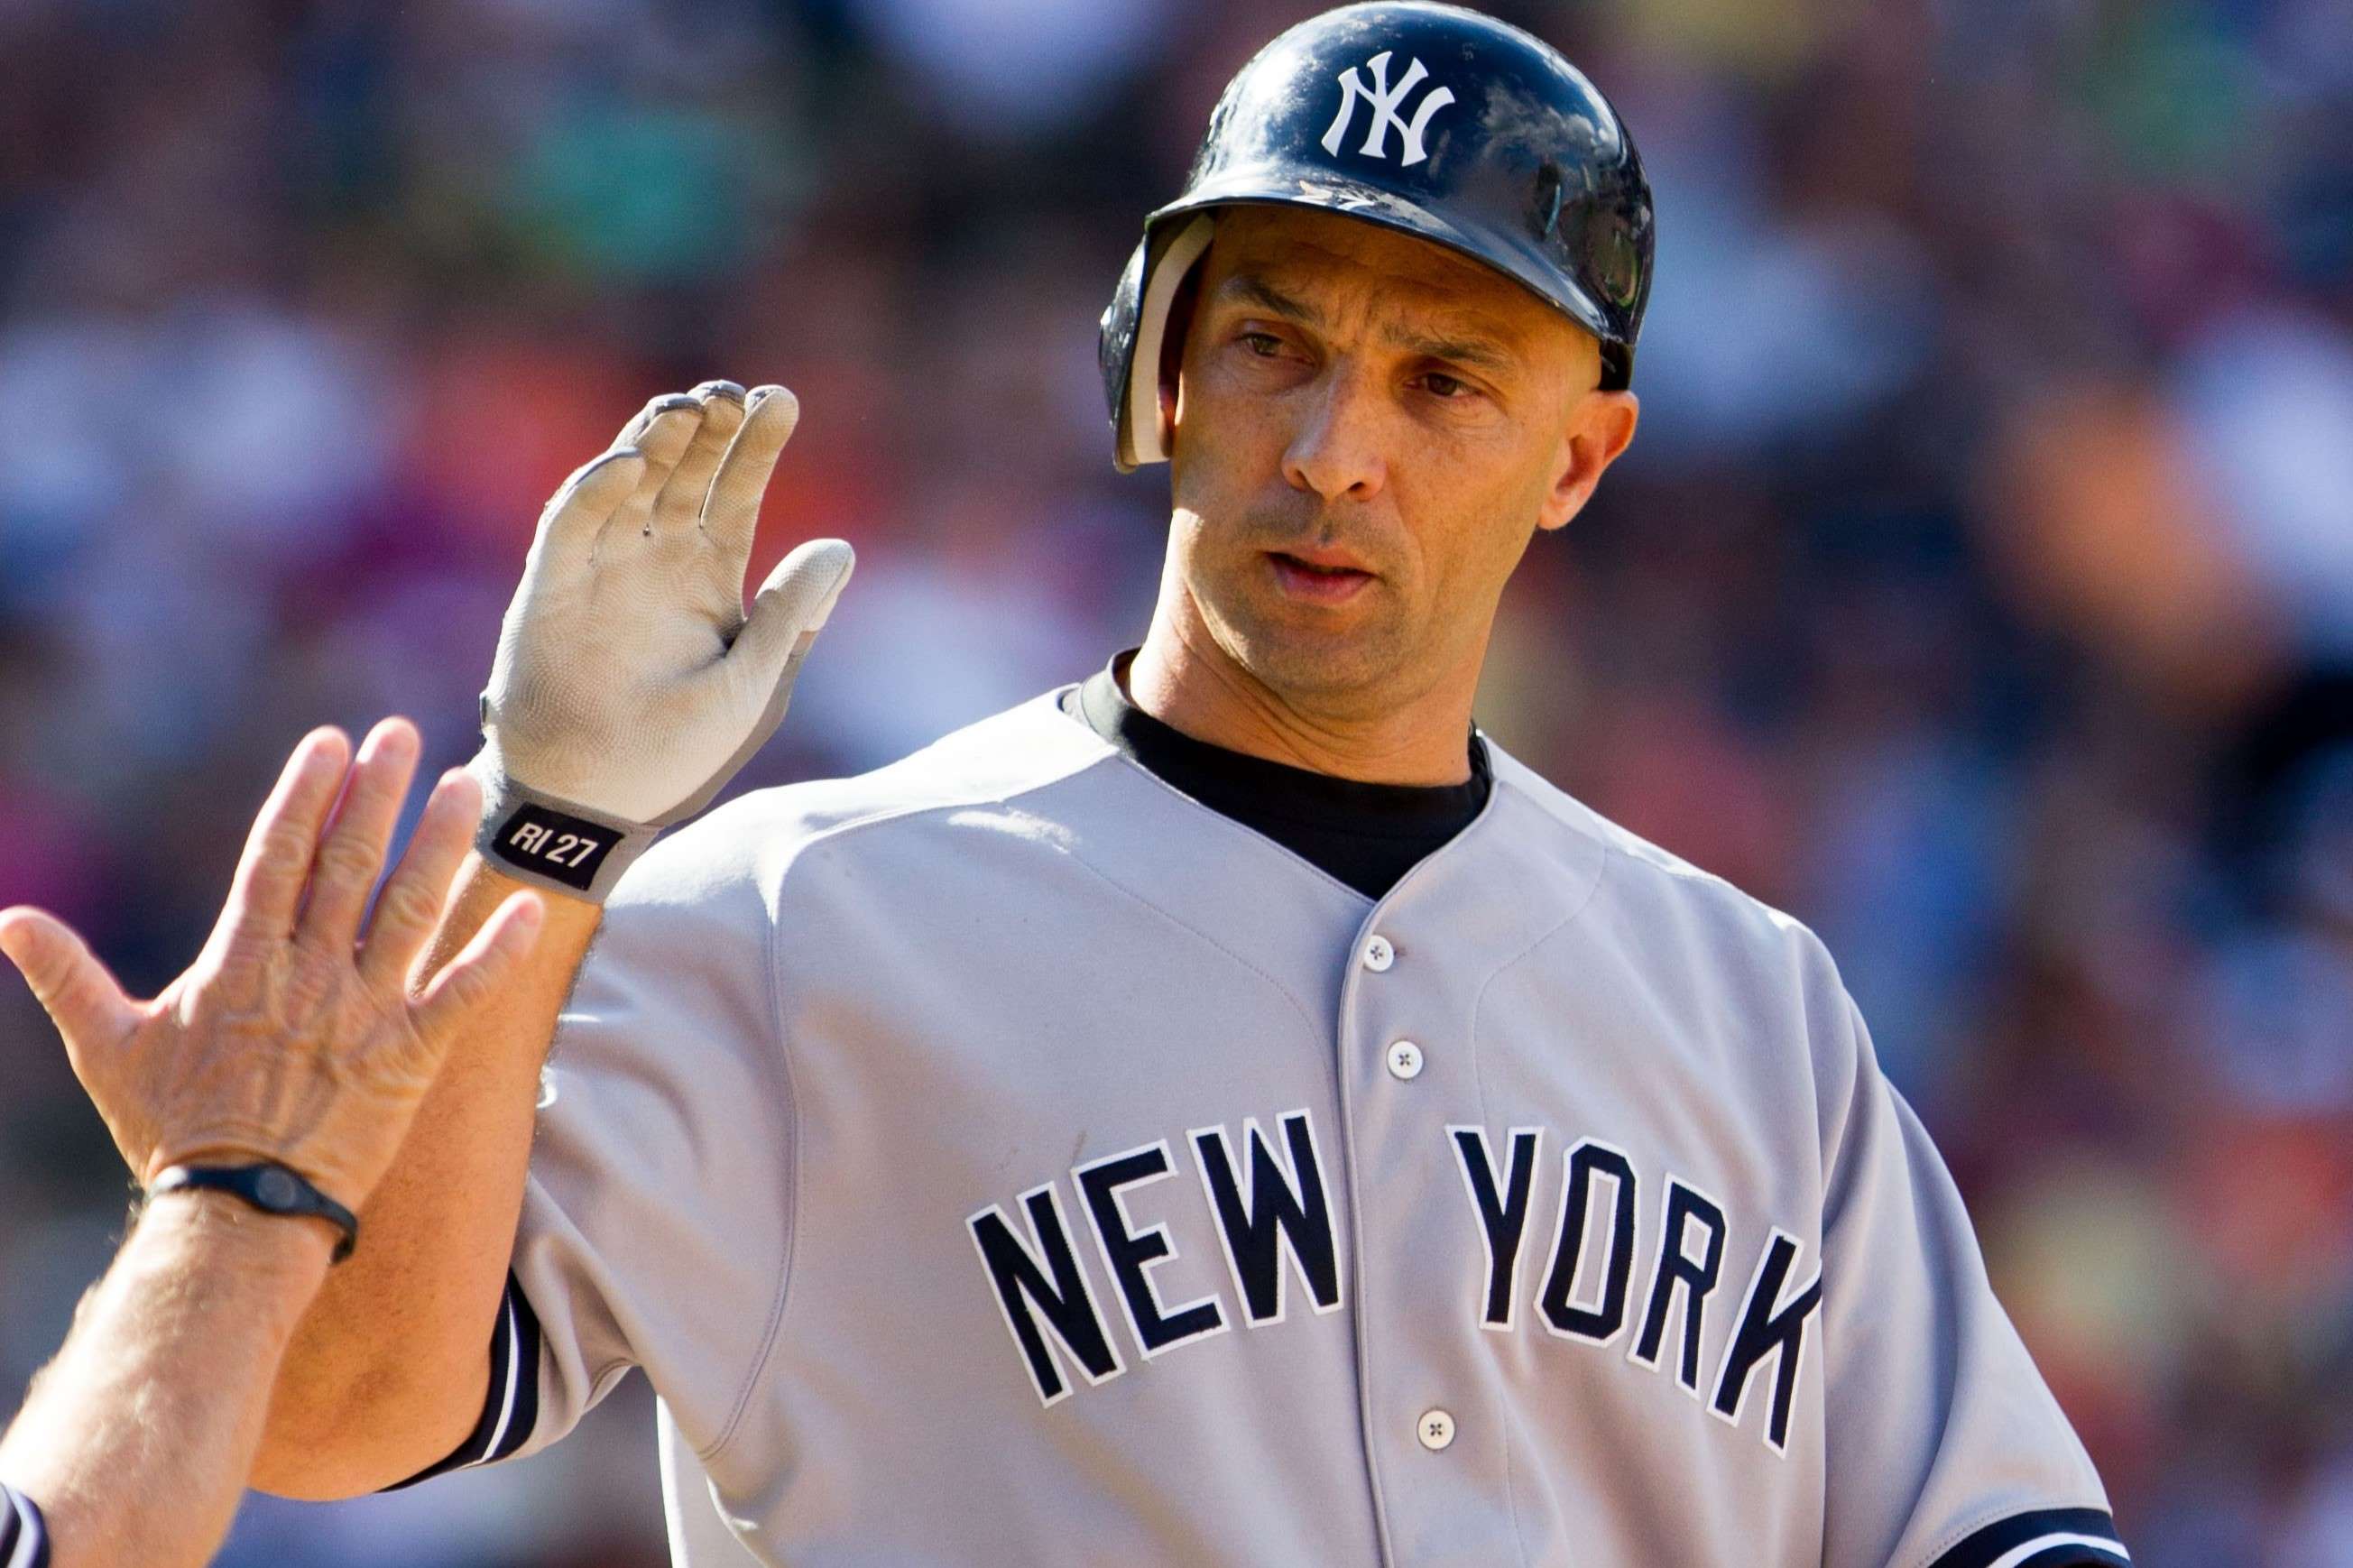 16-astounding-facts-about-raul-ibanez